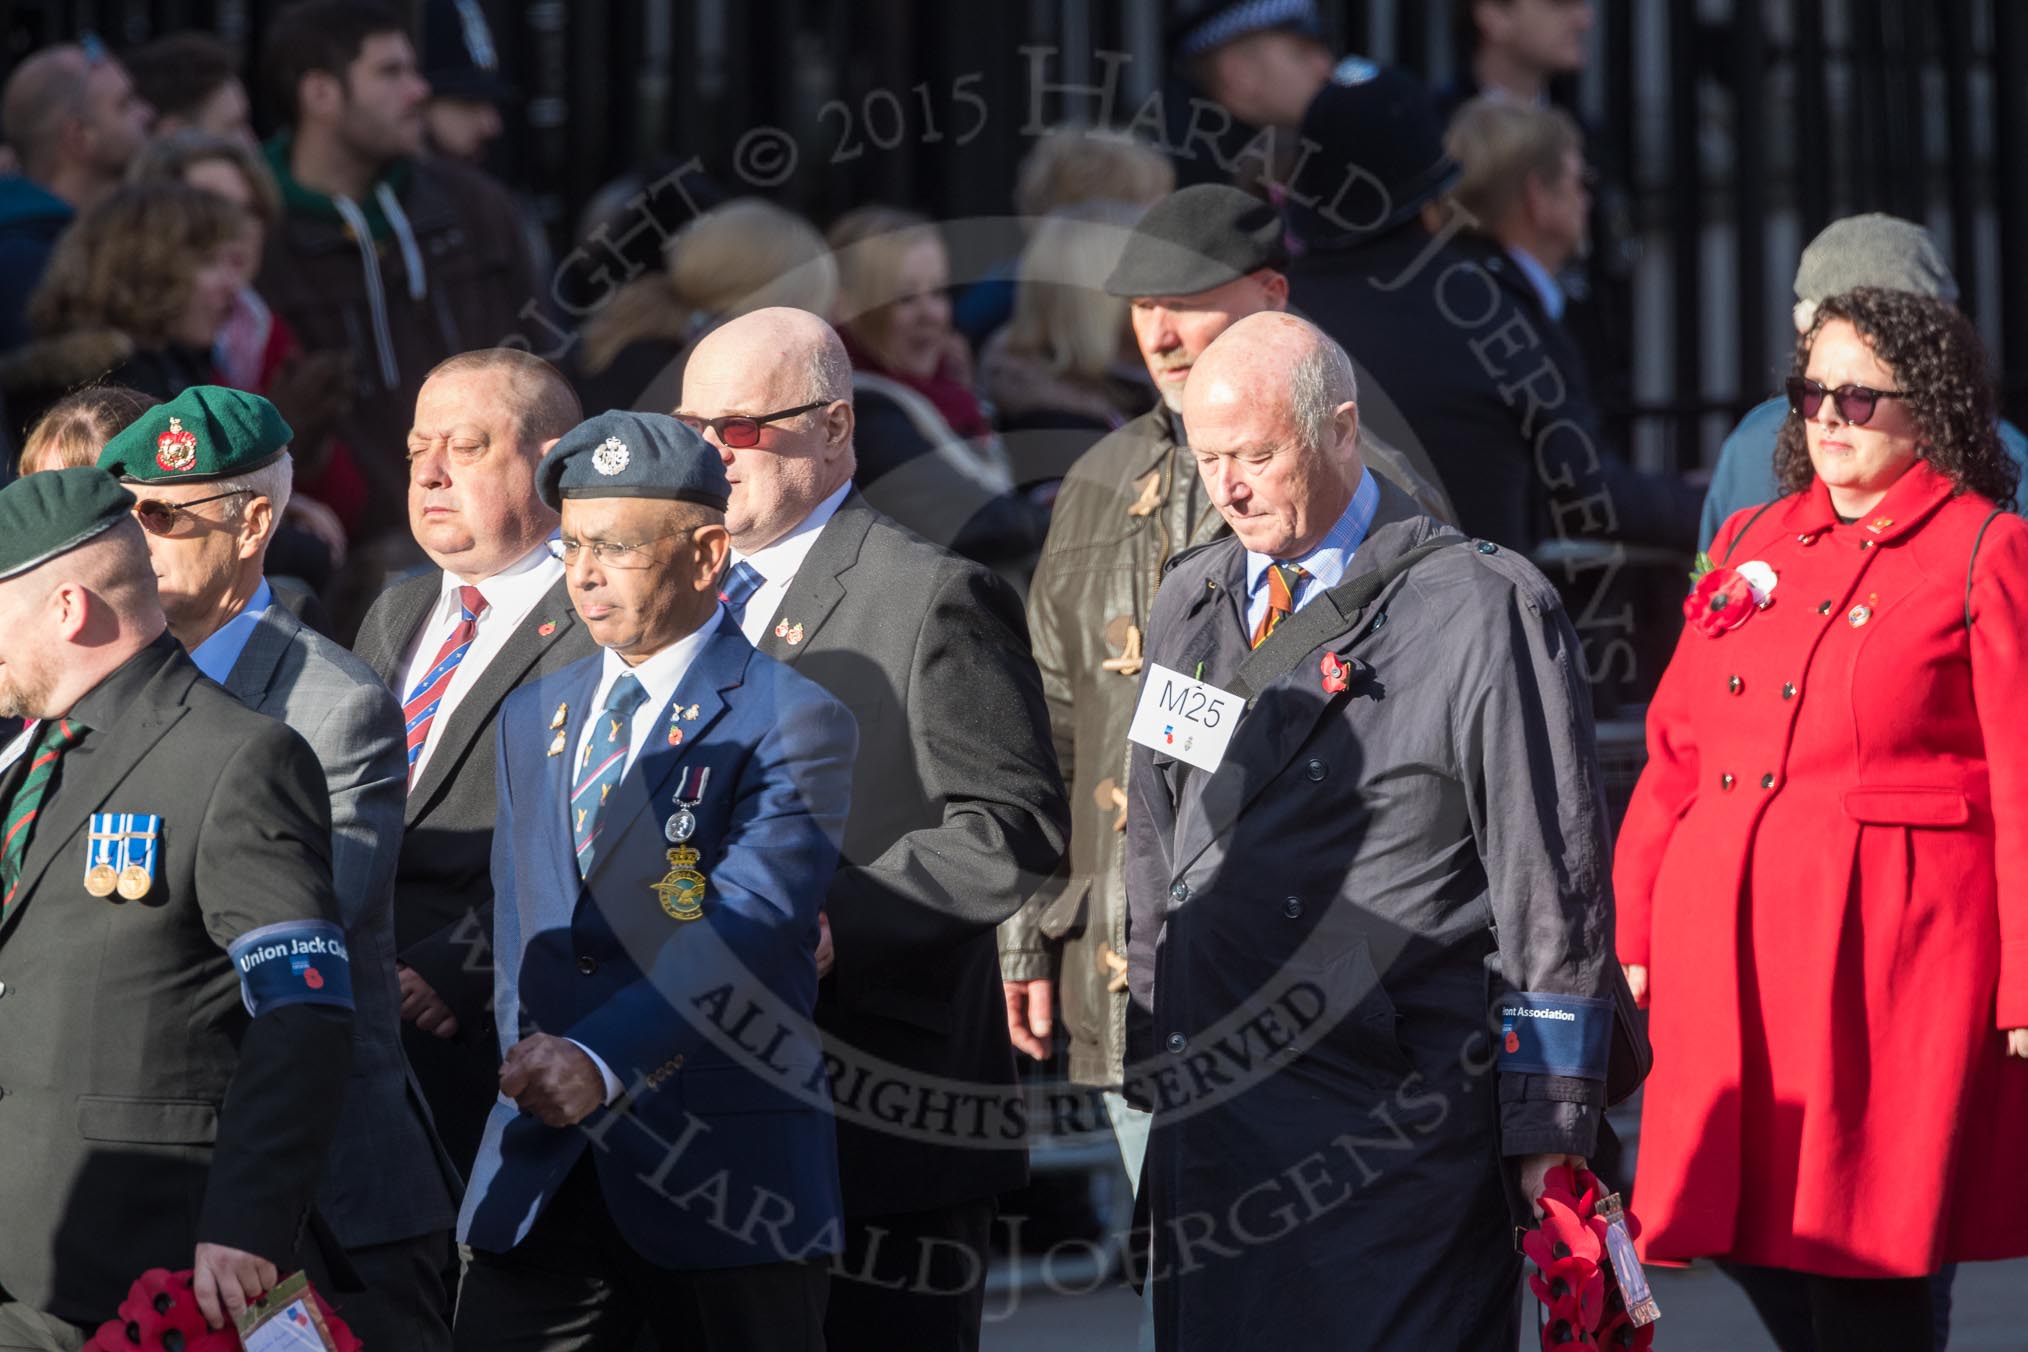 March Past, Remembrance Sunday at the Cenotaph 2016: M25 Western Front Association.
Cenotaph, Whitehall, London SW1,
London,
Greater London,
United Kingdom,
on 13 November 2016 at 13:16, image #2706